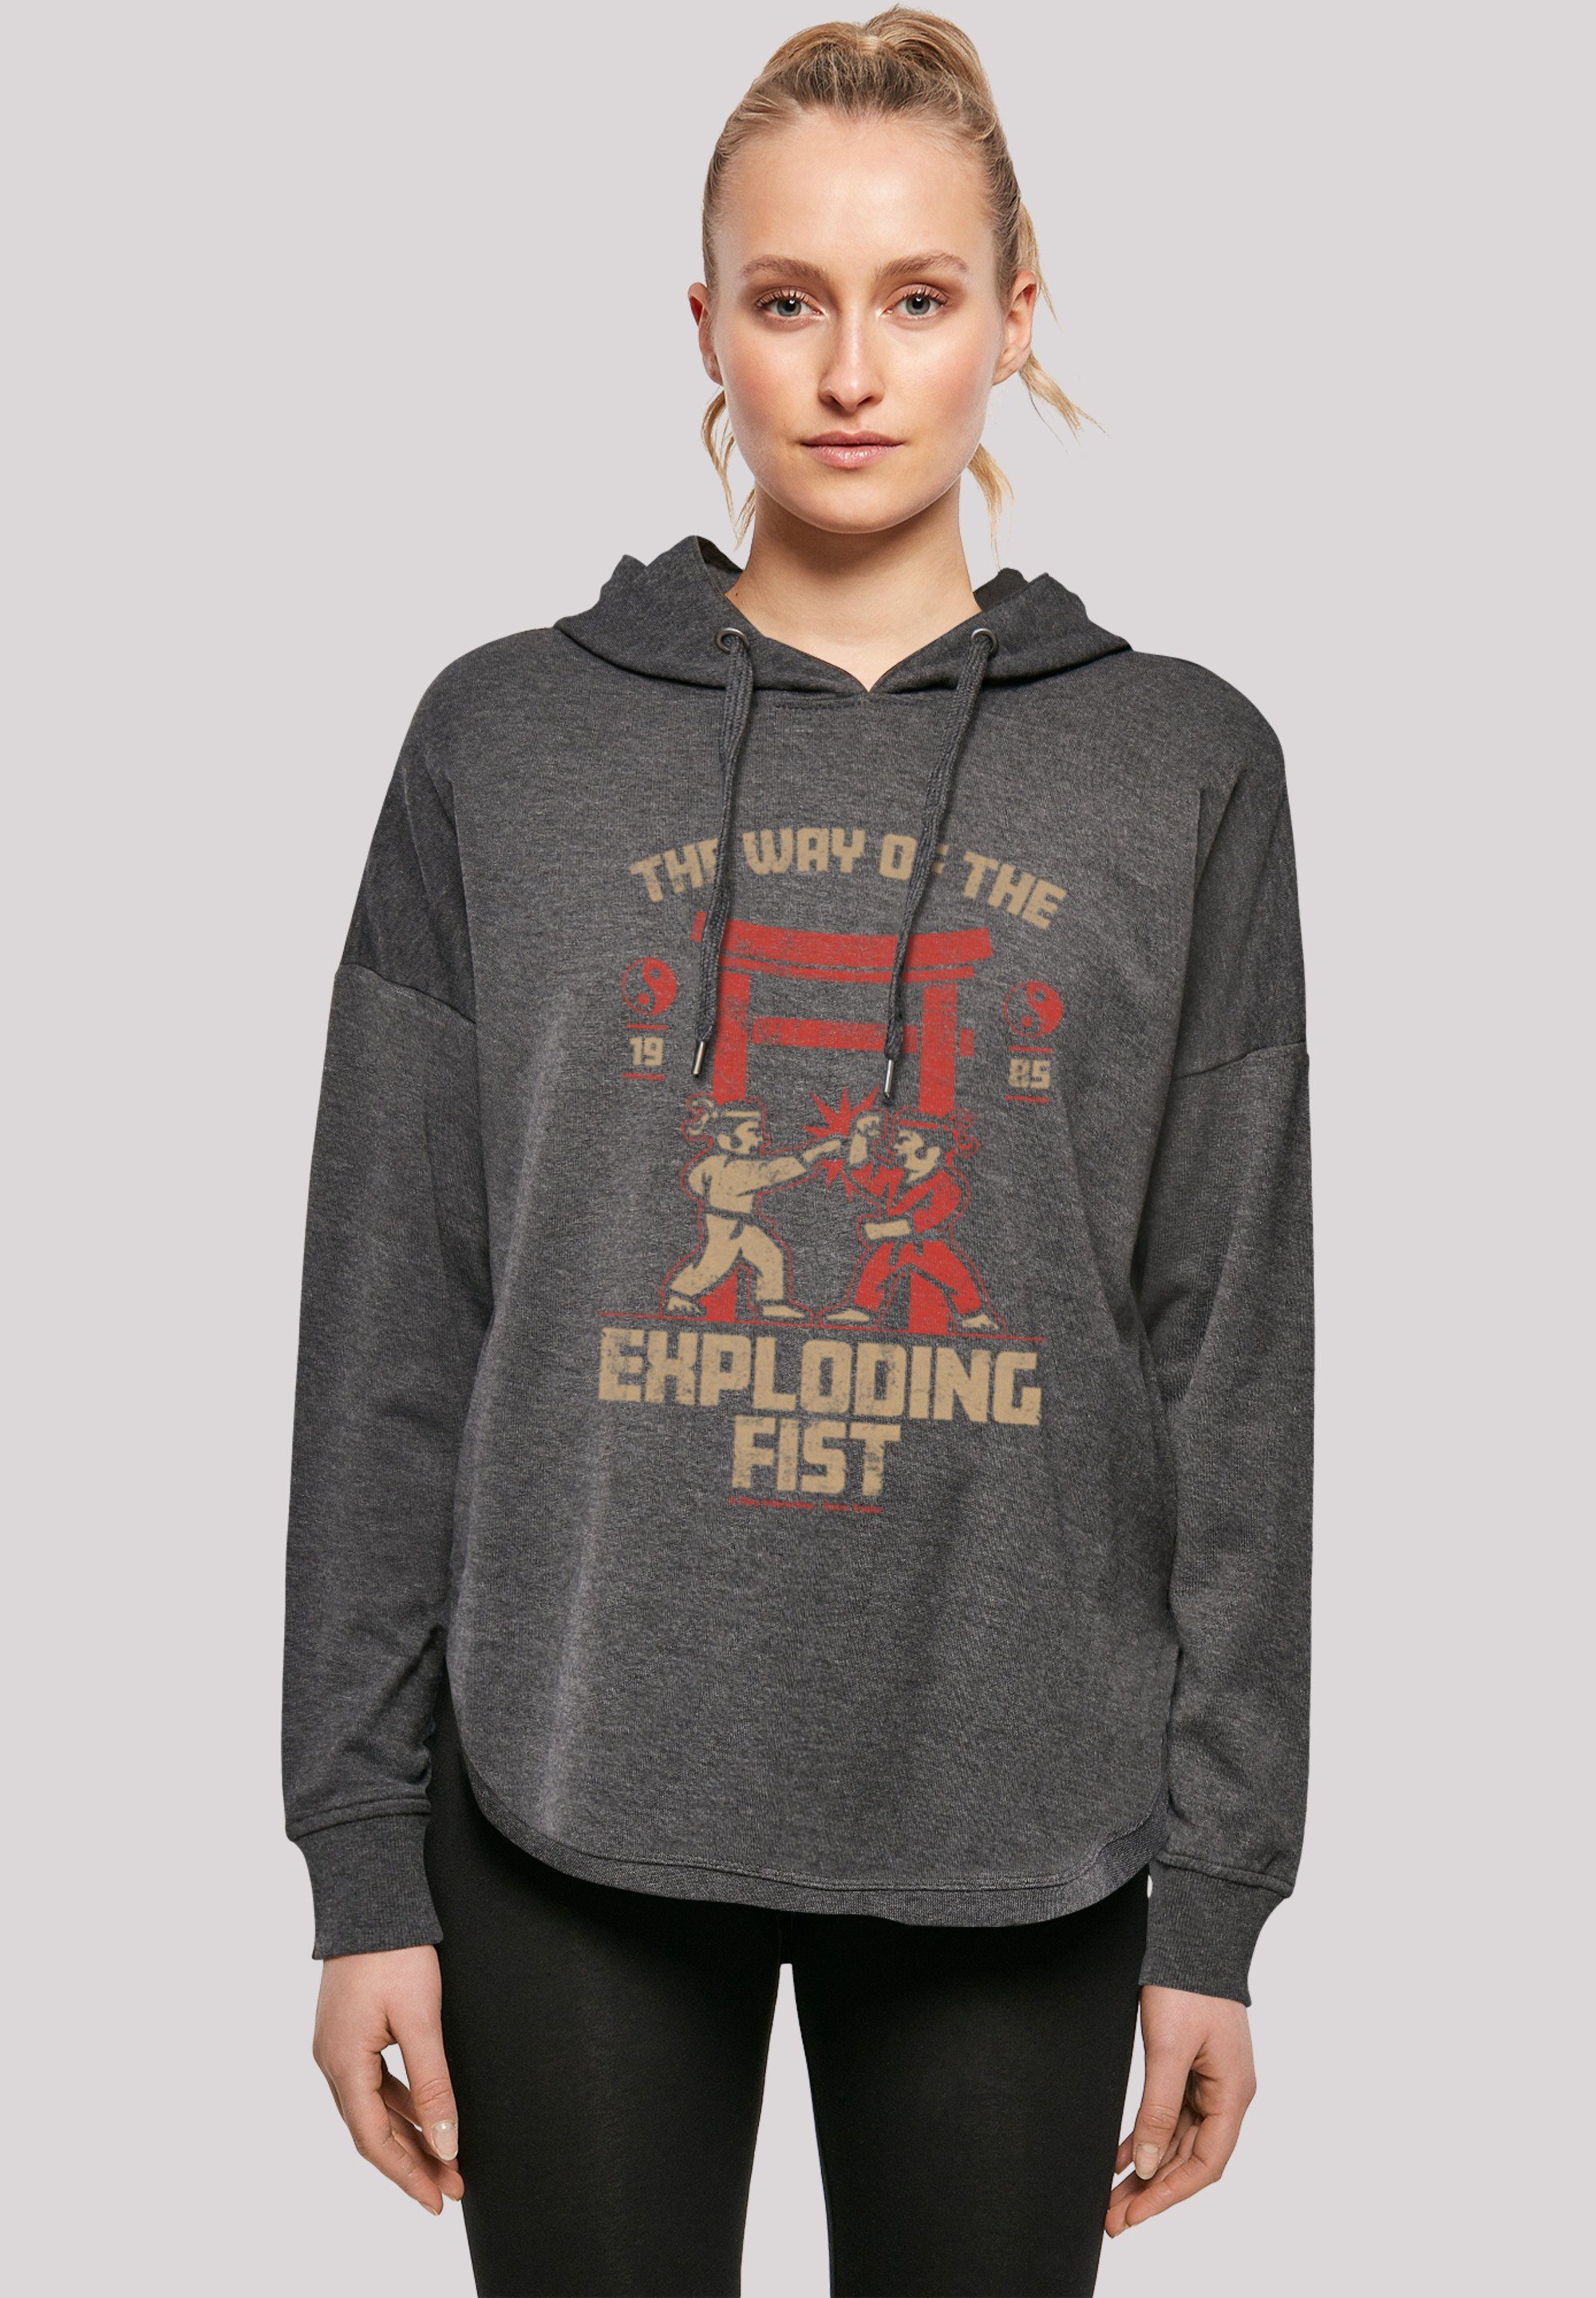 F4NT4STIC Kapuzenpullover Retro Gaming The Way of the Exploding Fist Print charcoal | Hoodies